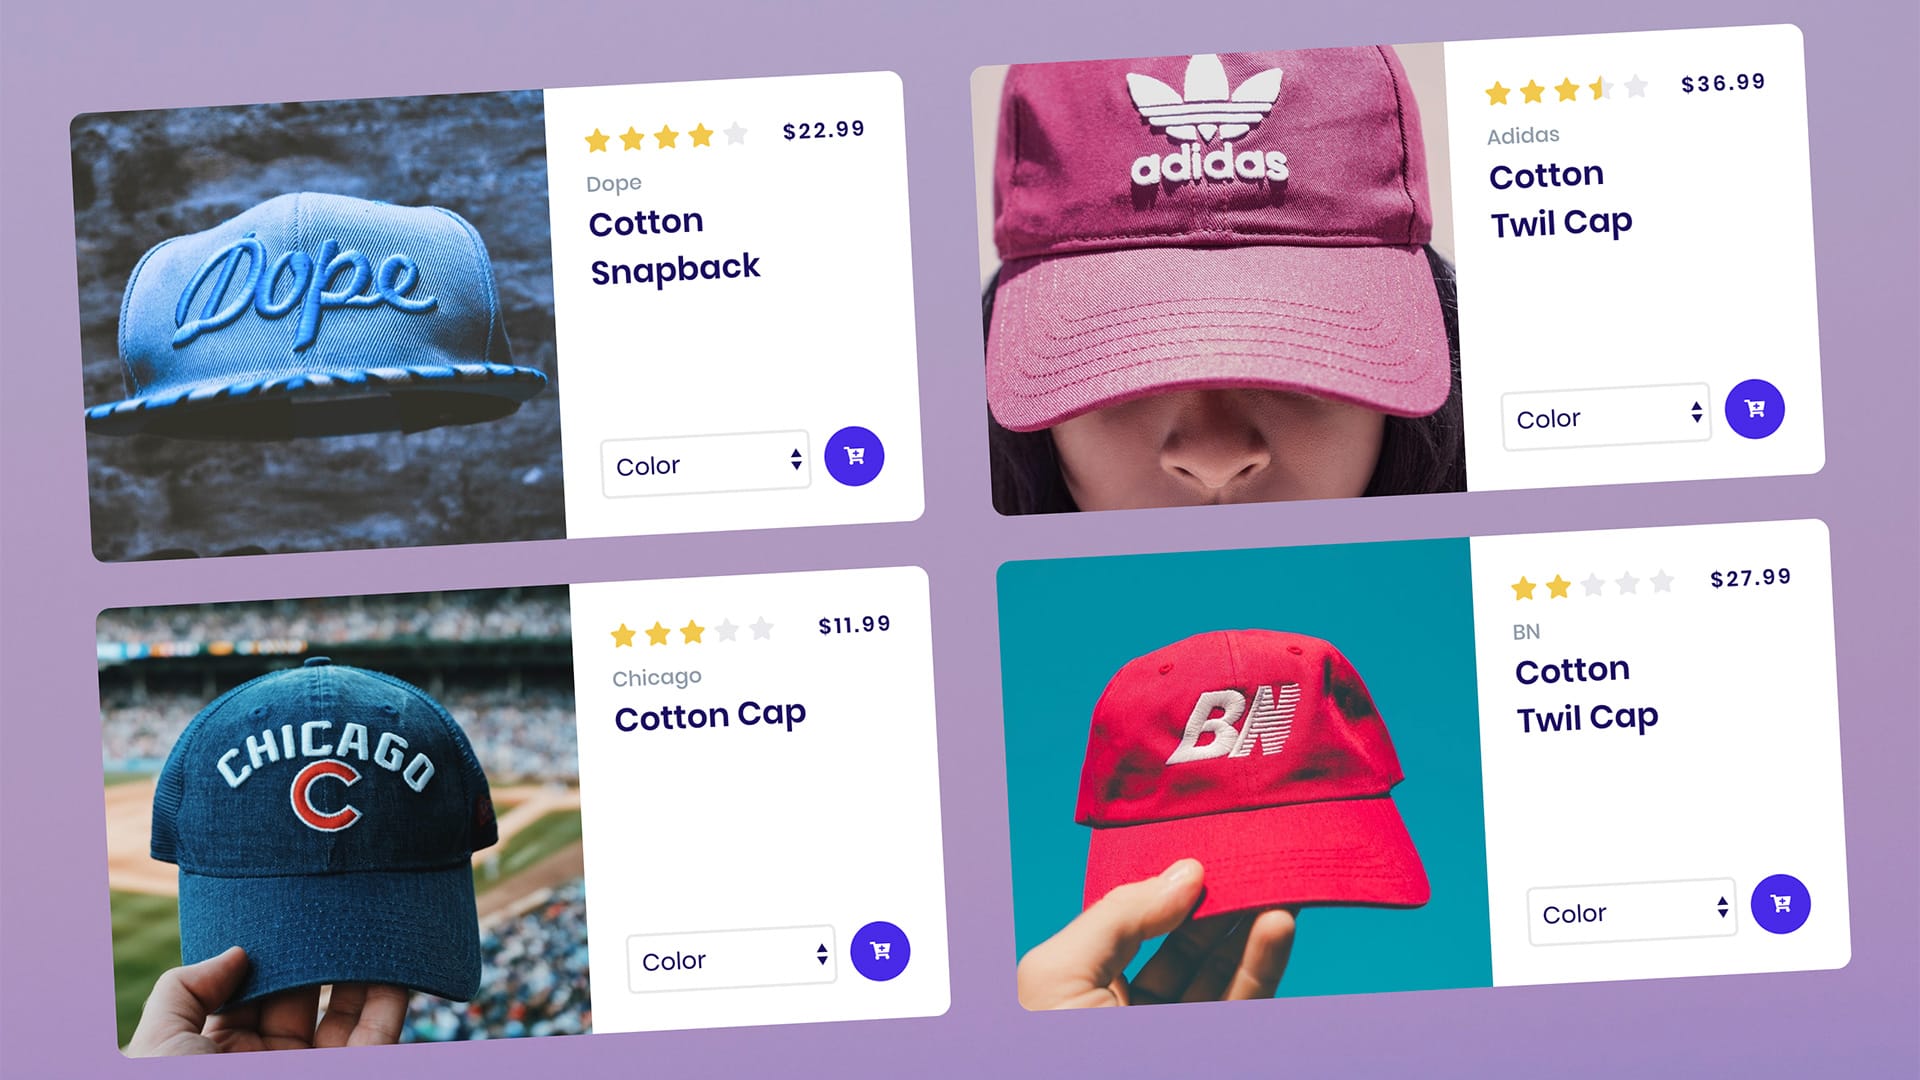 Bootstrap Carousel Guide: Examples and Tutorials - Designmodo